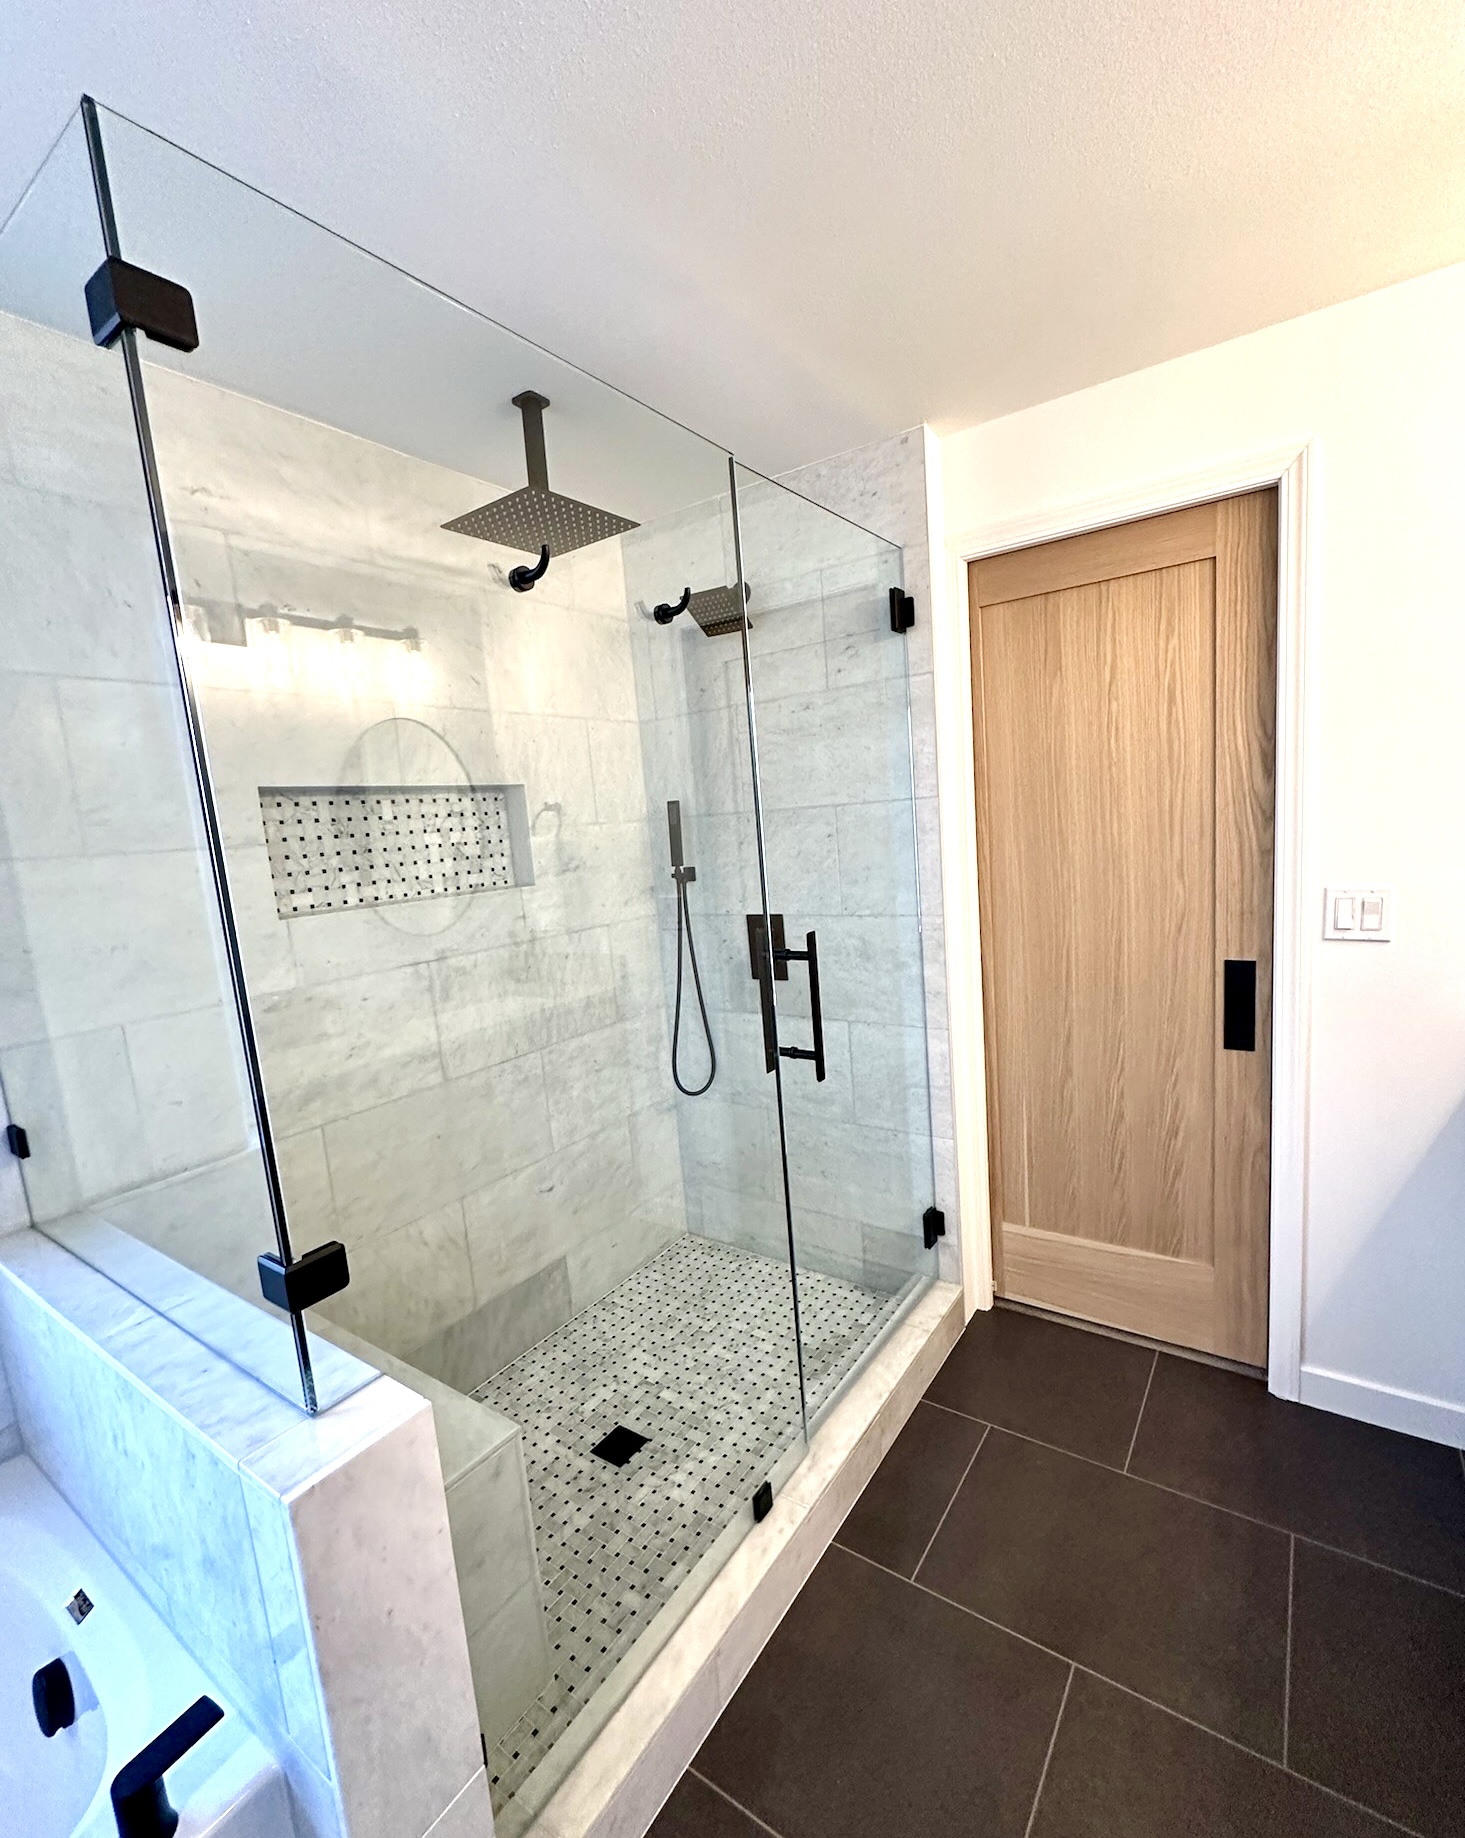 Bright and clean newly remodeled primary shower, with two glass walls and natural tile stone on walls and floor